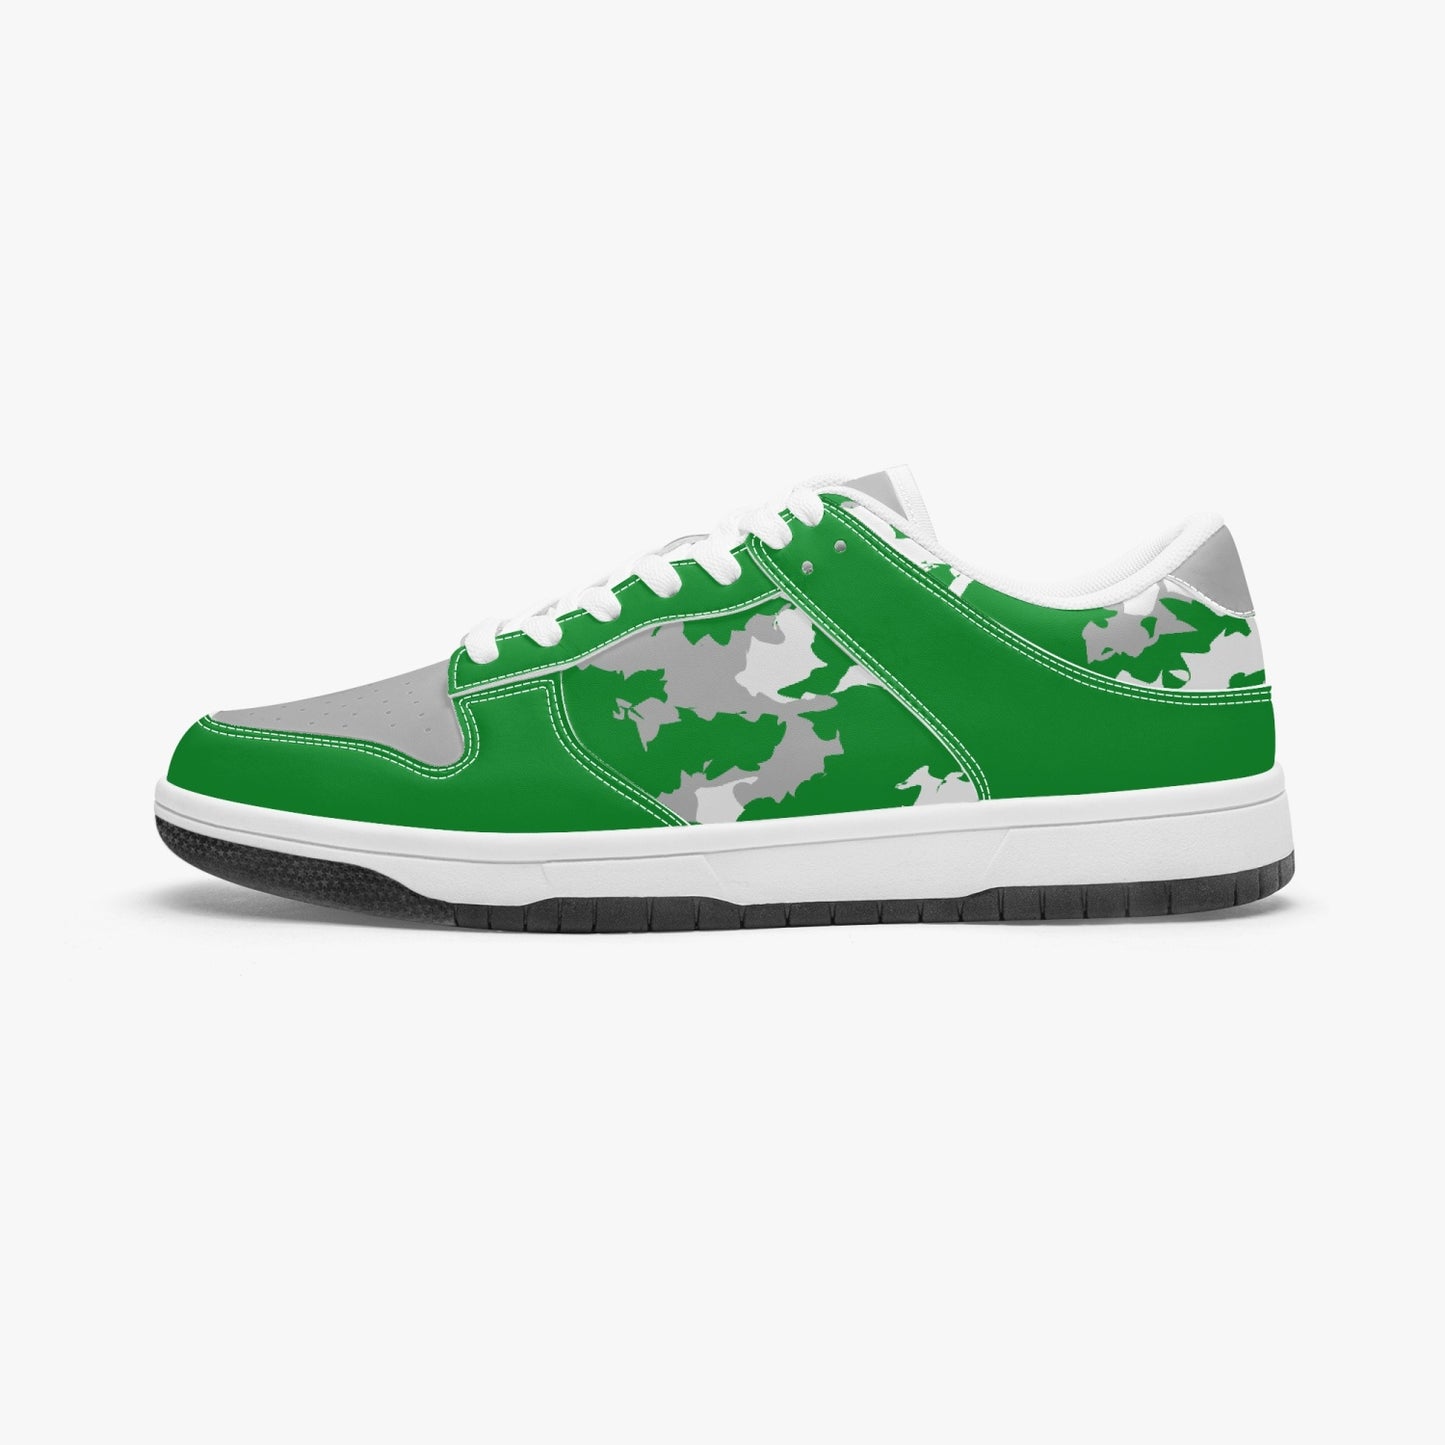 Kicxs Kelly Green Low-Top Leather Sneakers